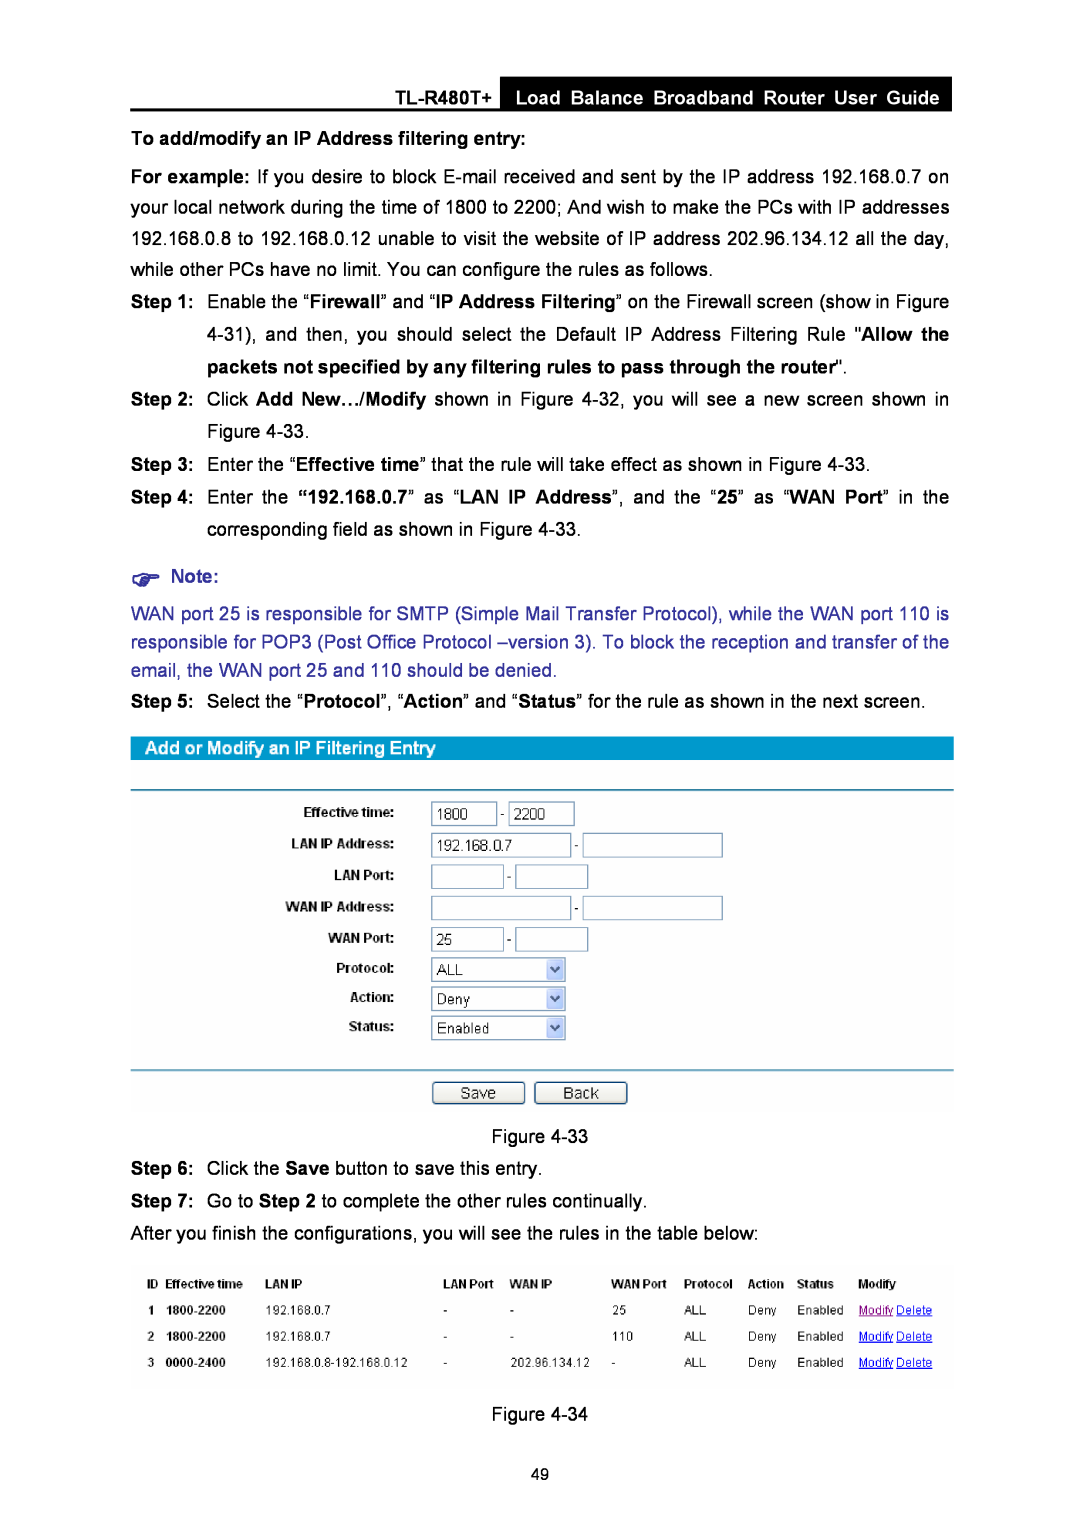 TP-Link TL-R480T+ manual Load Balance Broadband Router User Guide, To add/modify an IP Address filtering entry 